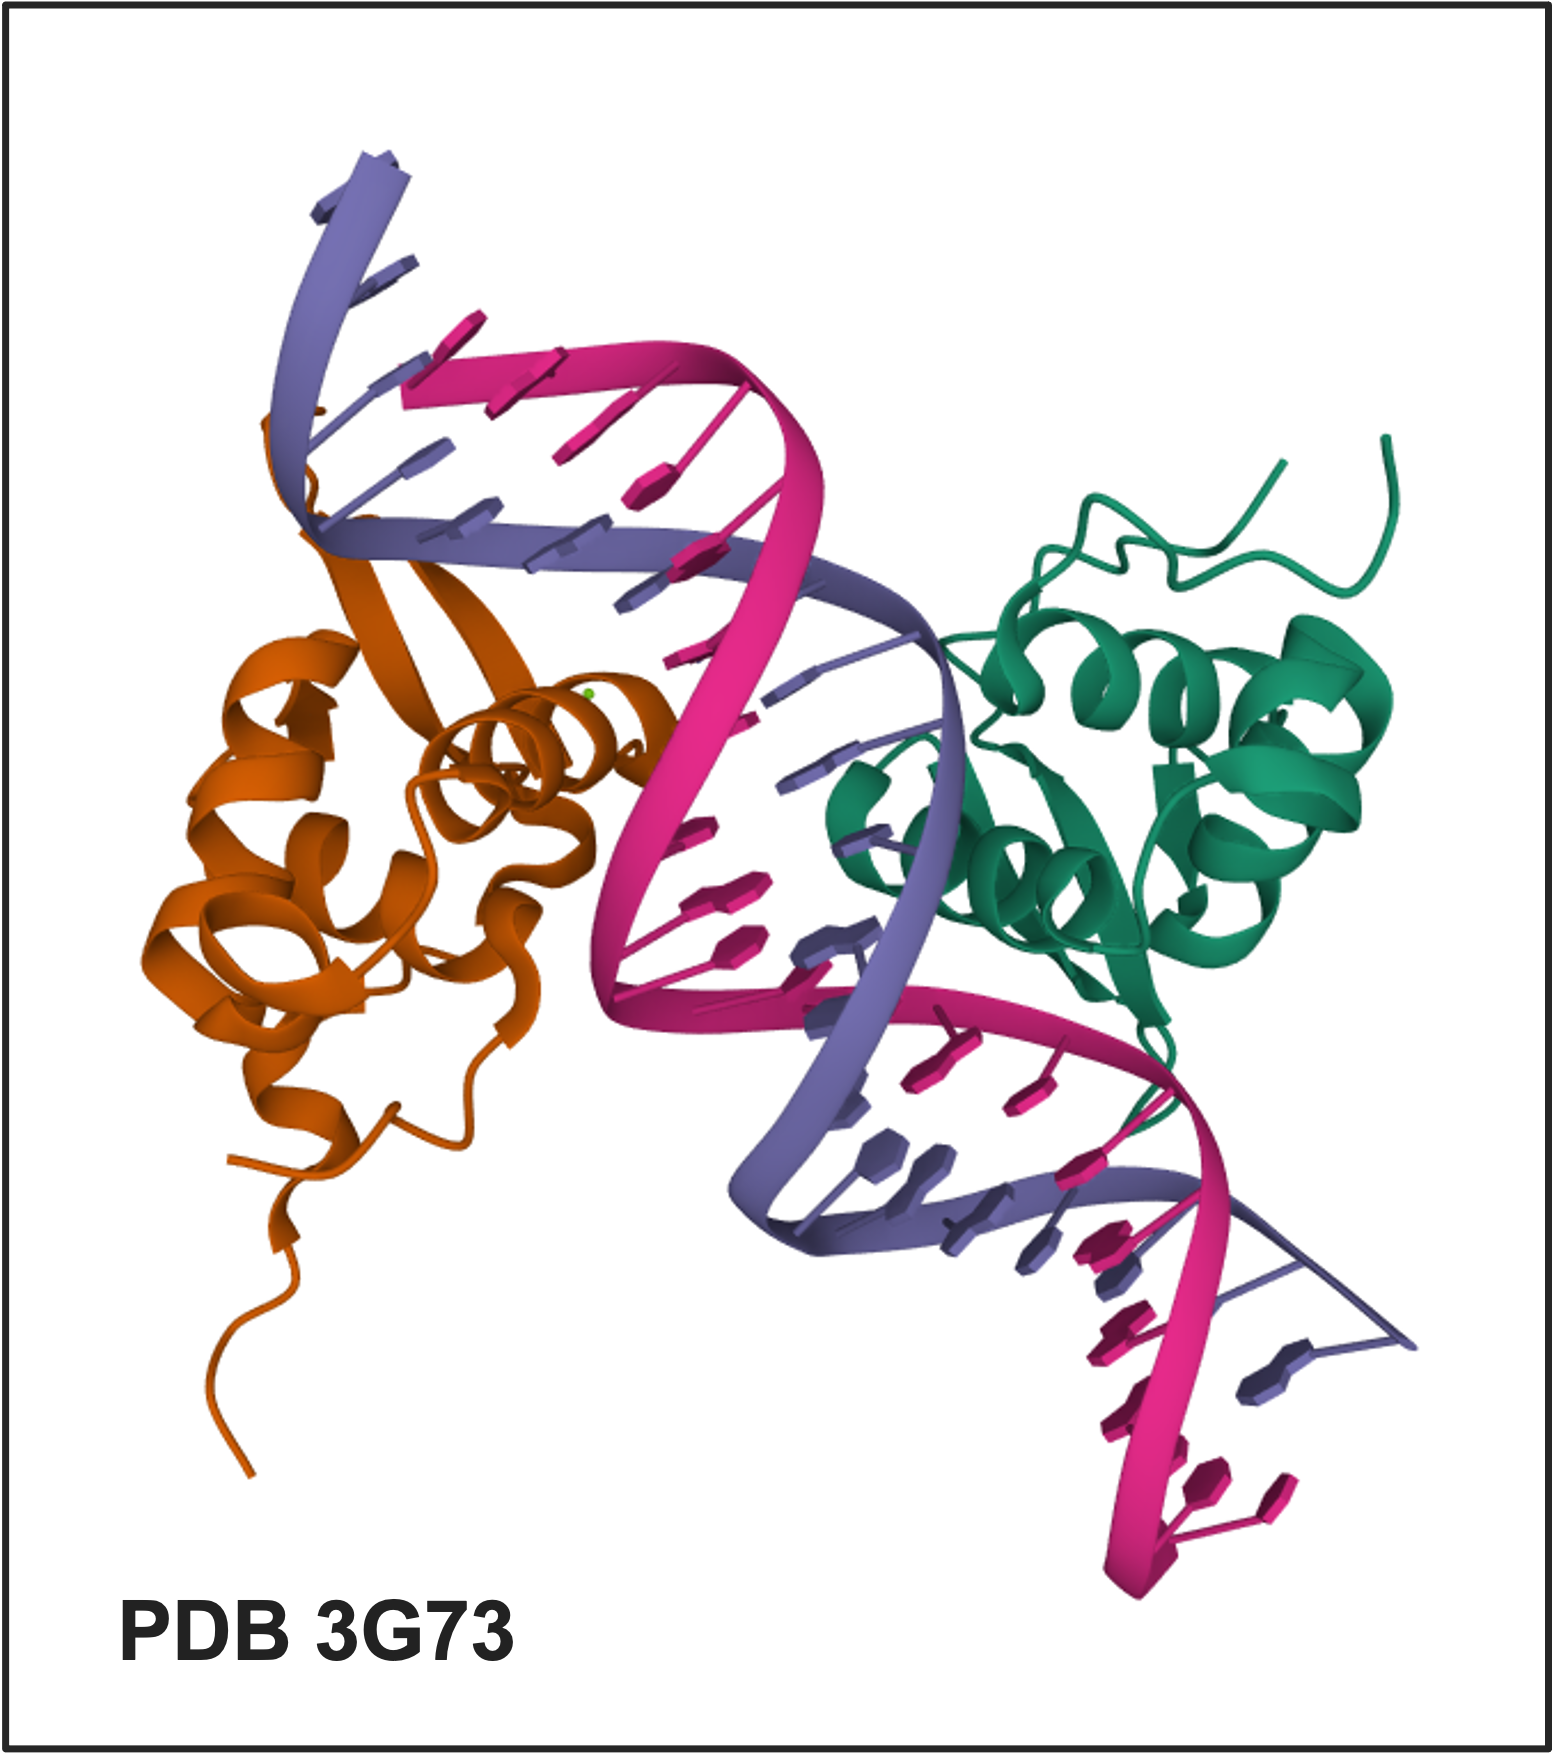 PDB 3G73 - Structure of the FOXM1 DNA binding